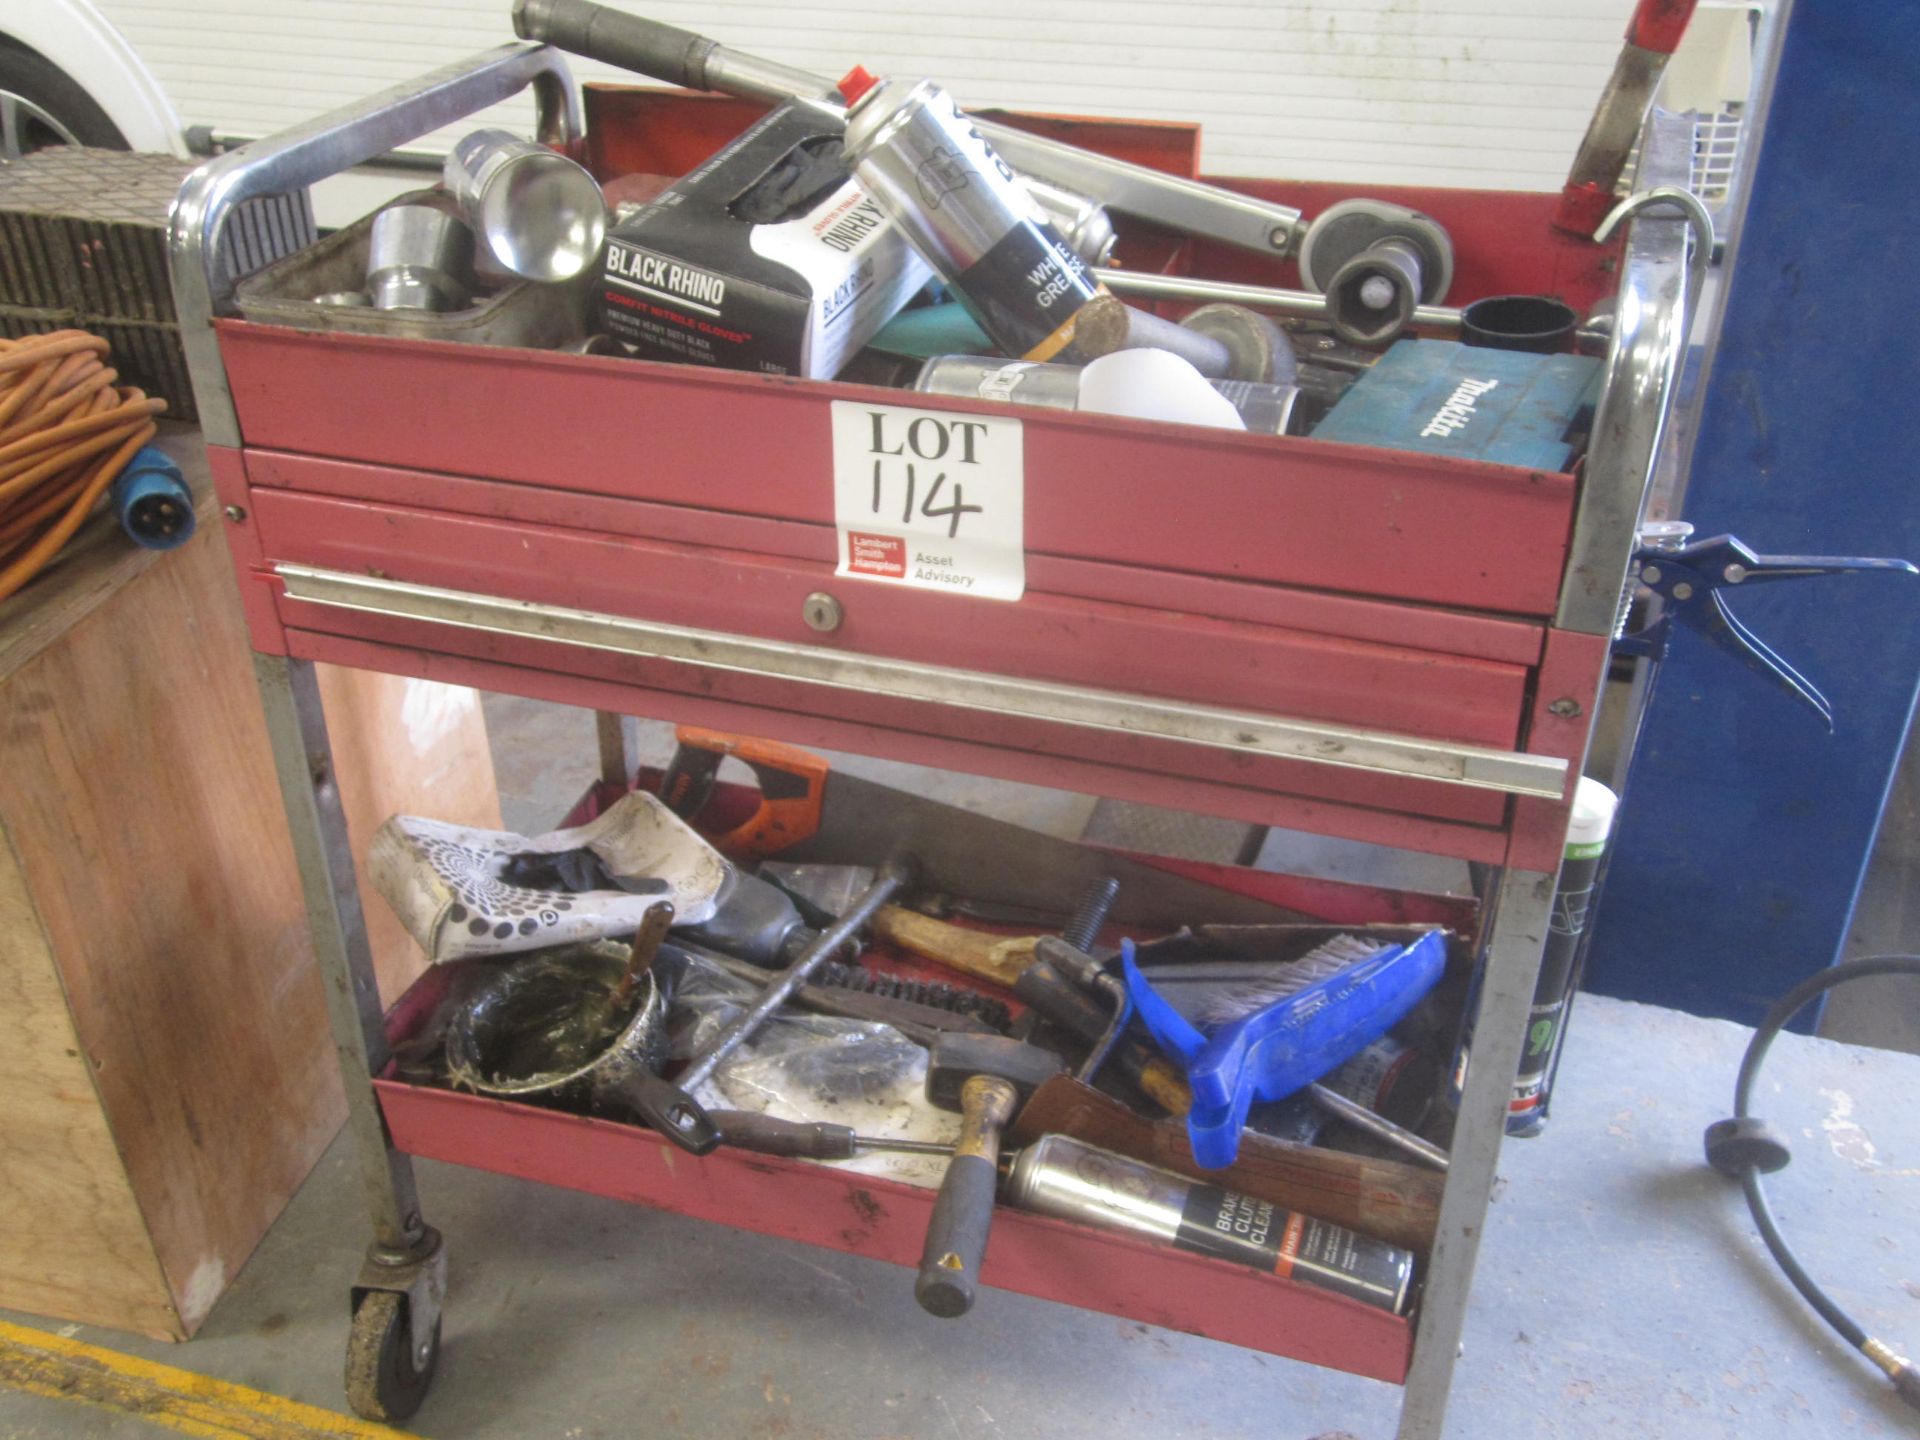 Mobile tool trolley with contents of tools